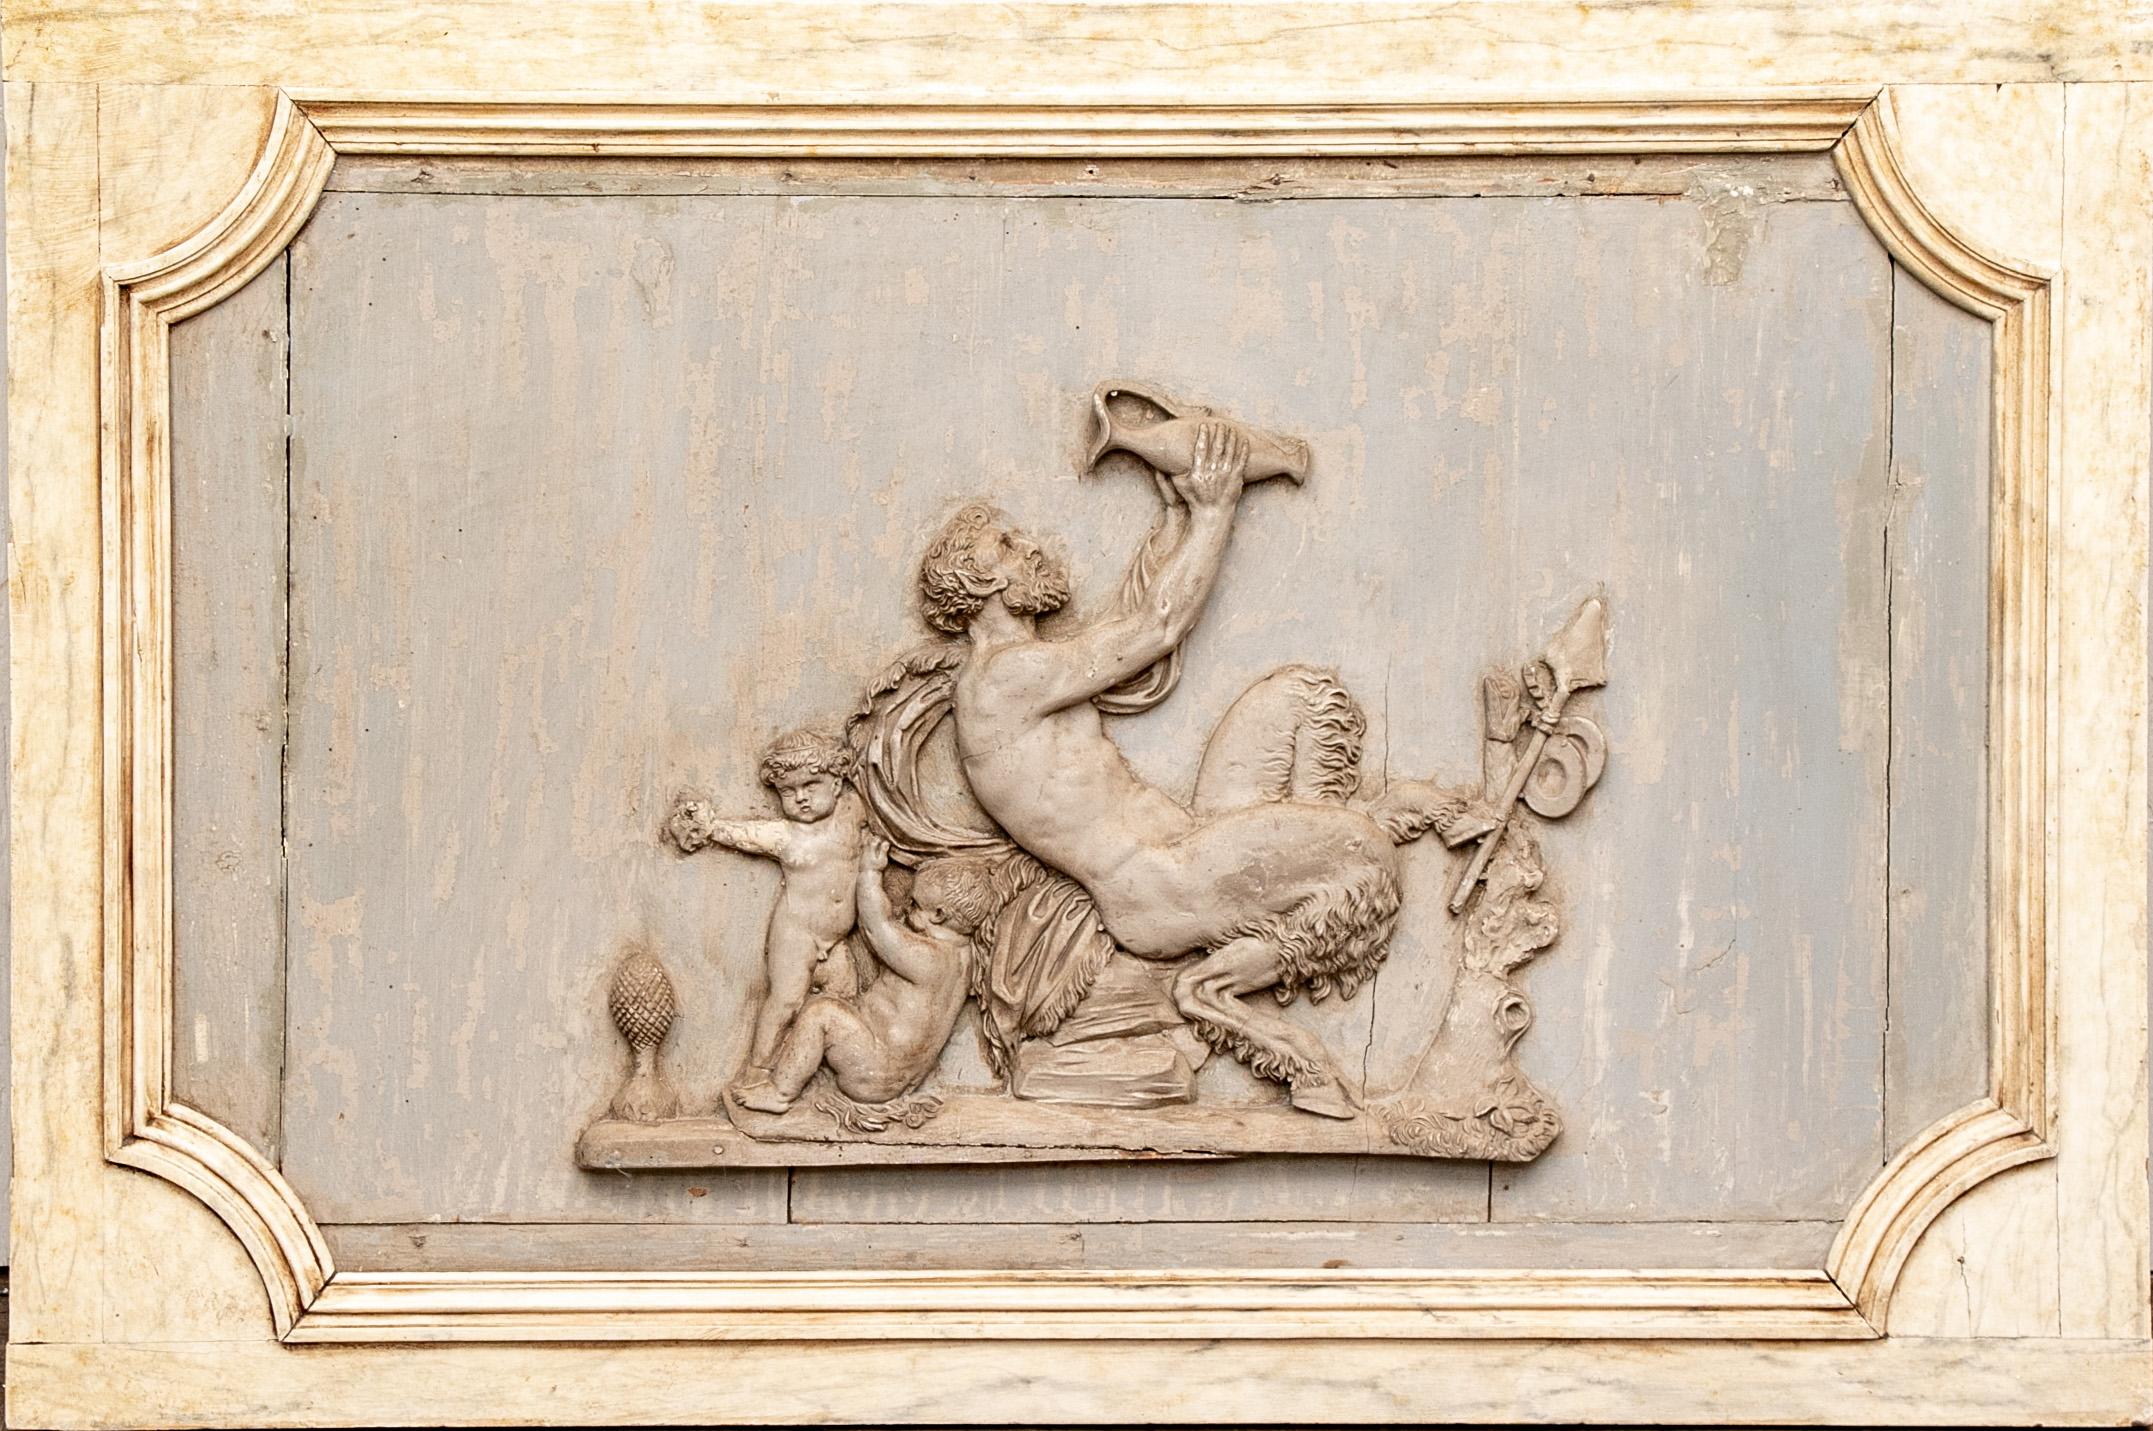 Rare and decidedly spectacular early pair of neoclassical plaques. One having a carved and painted Bacchic relief plaque with putti joining Pan drinking from a jar. The antique plaques mounted in pale yellow faux marble painted wood frames.
The